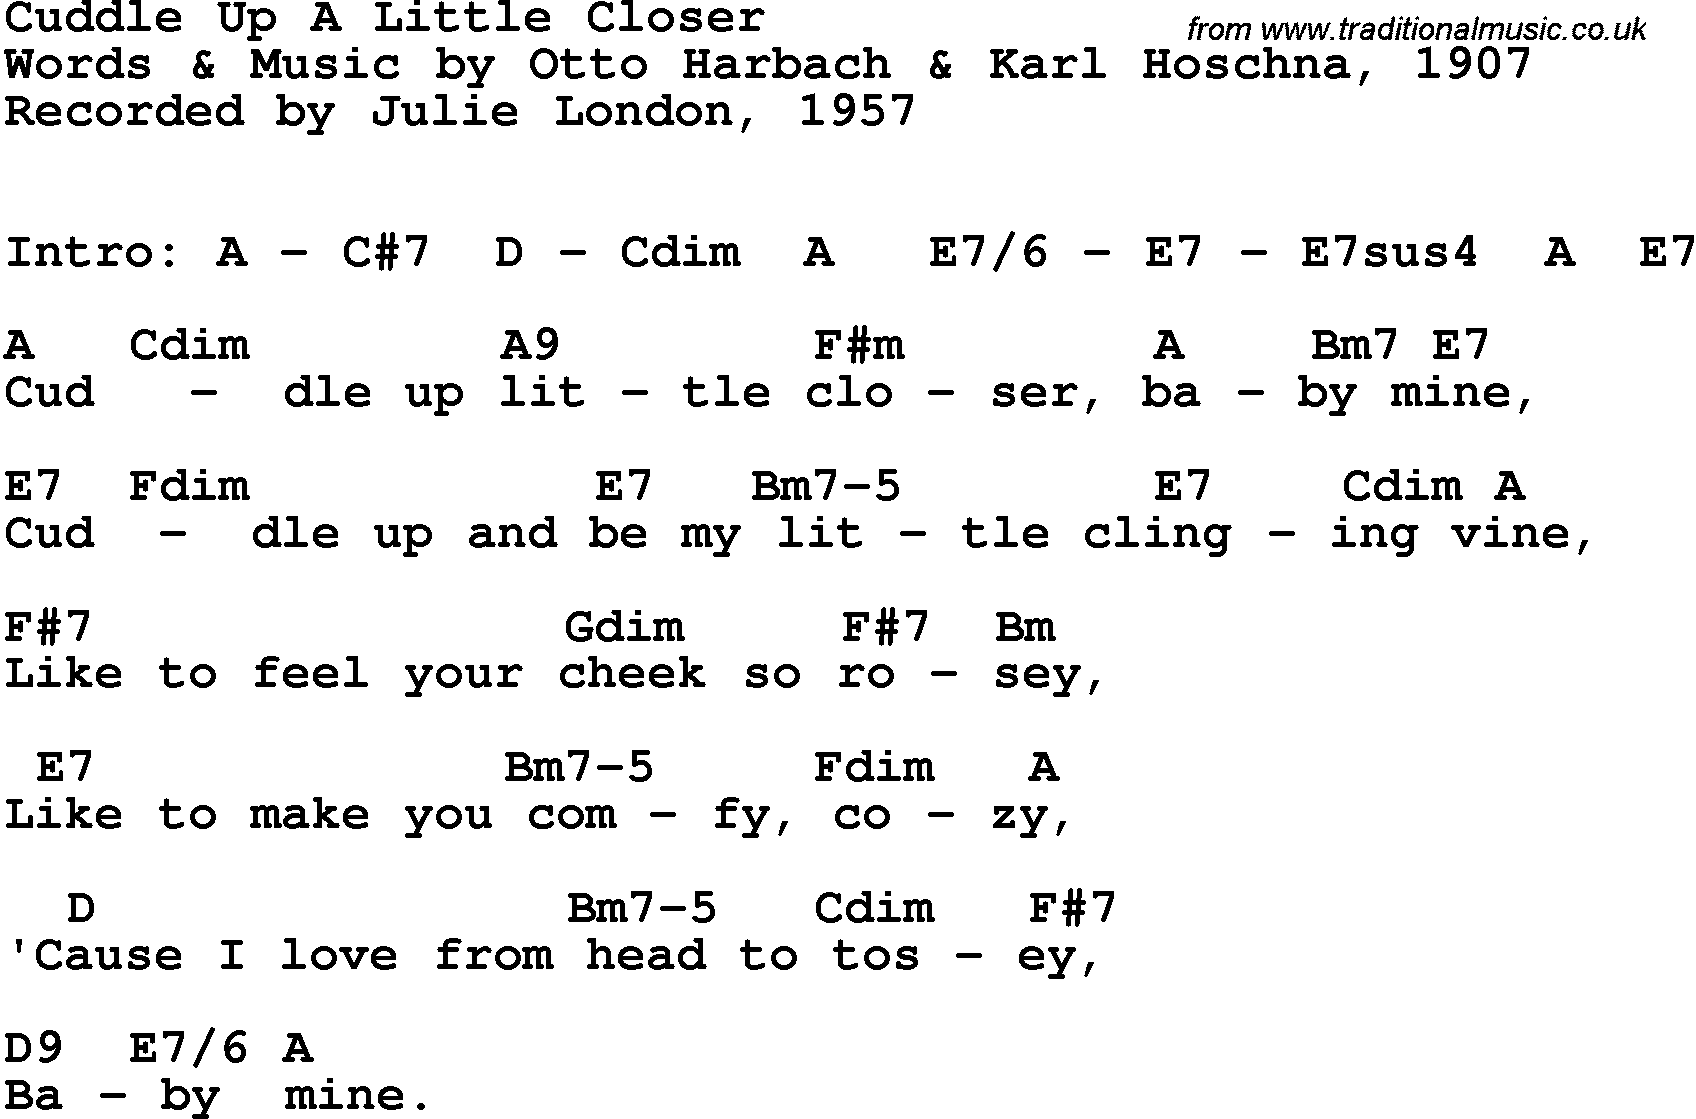 Song Lyrics with guitar chords for Cuddle Up A Little Closer - Julie London, 1955